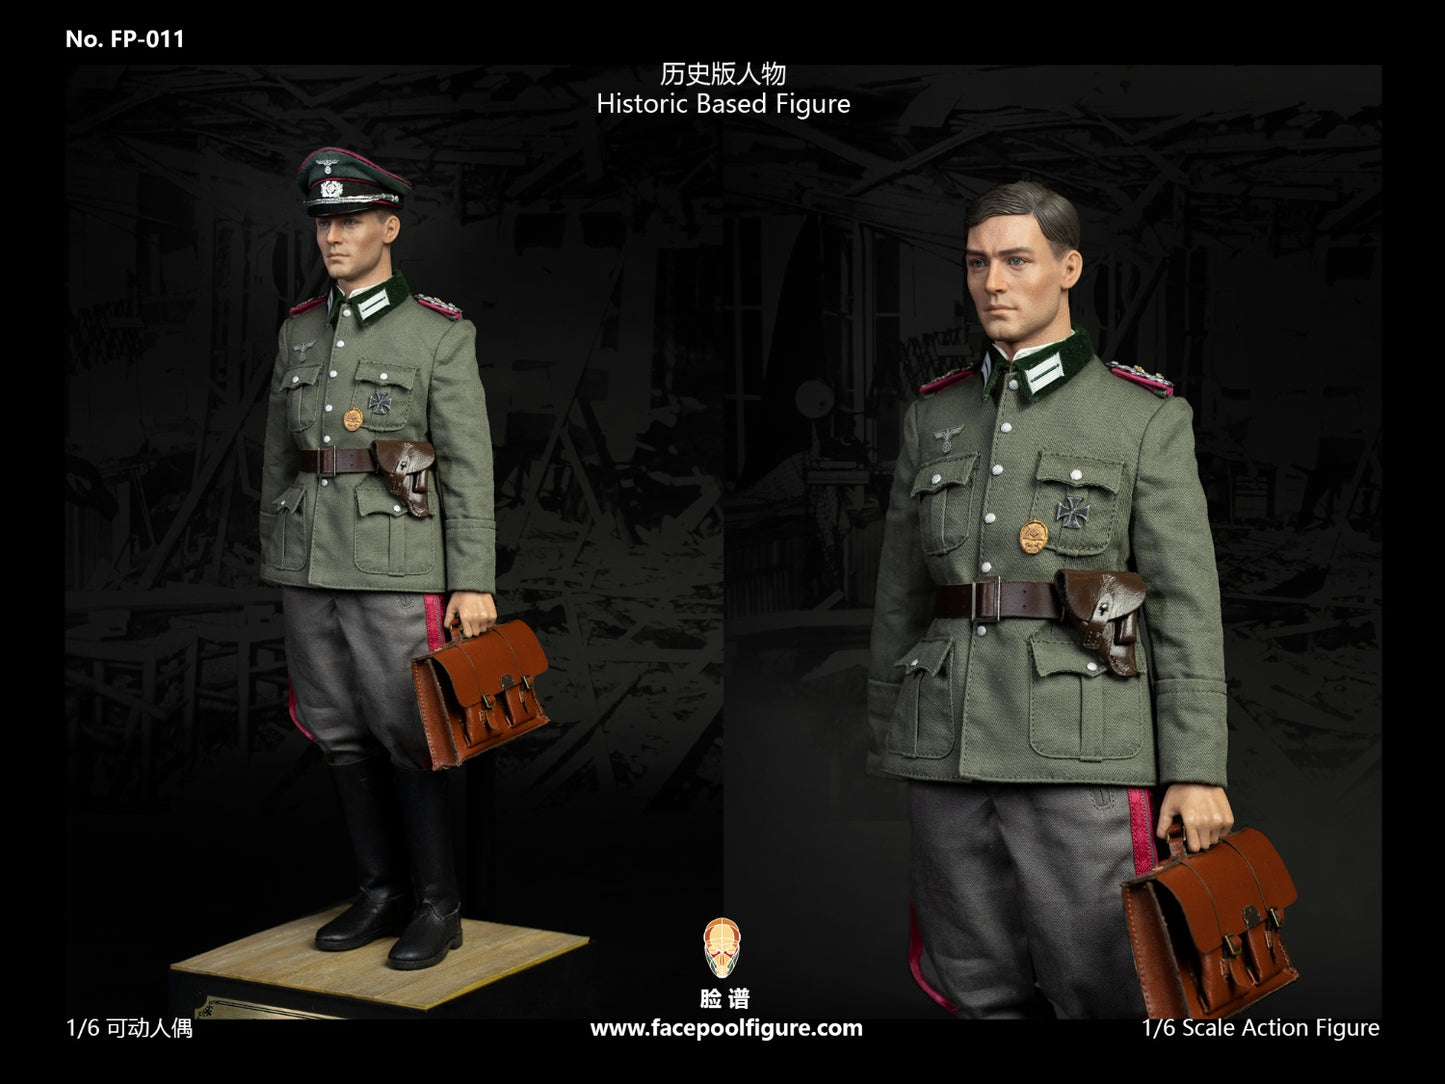 Facepoolfigure FP011B 1/6 Discover History Series Operation Valkyrie (SPECIAL ver.)